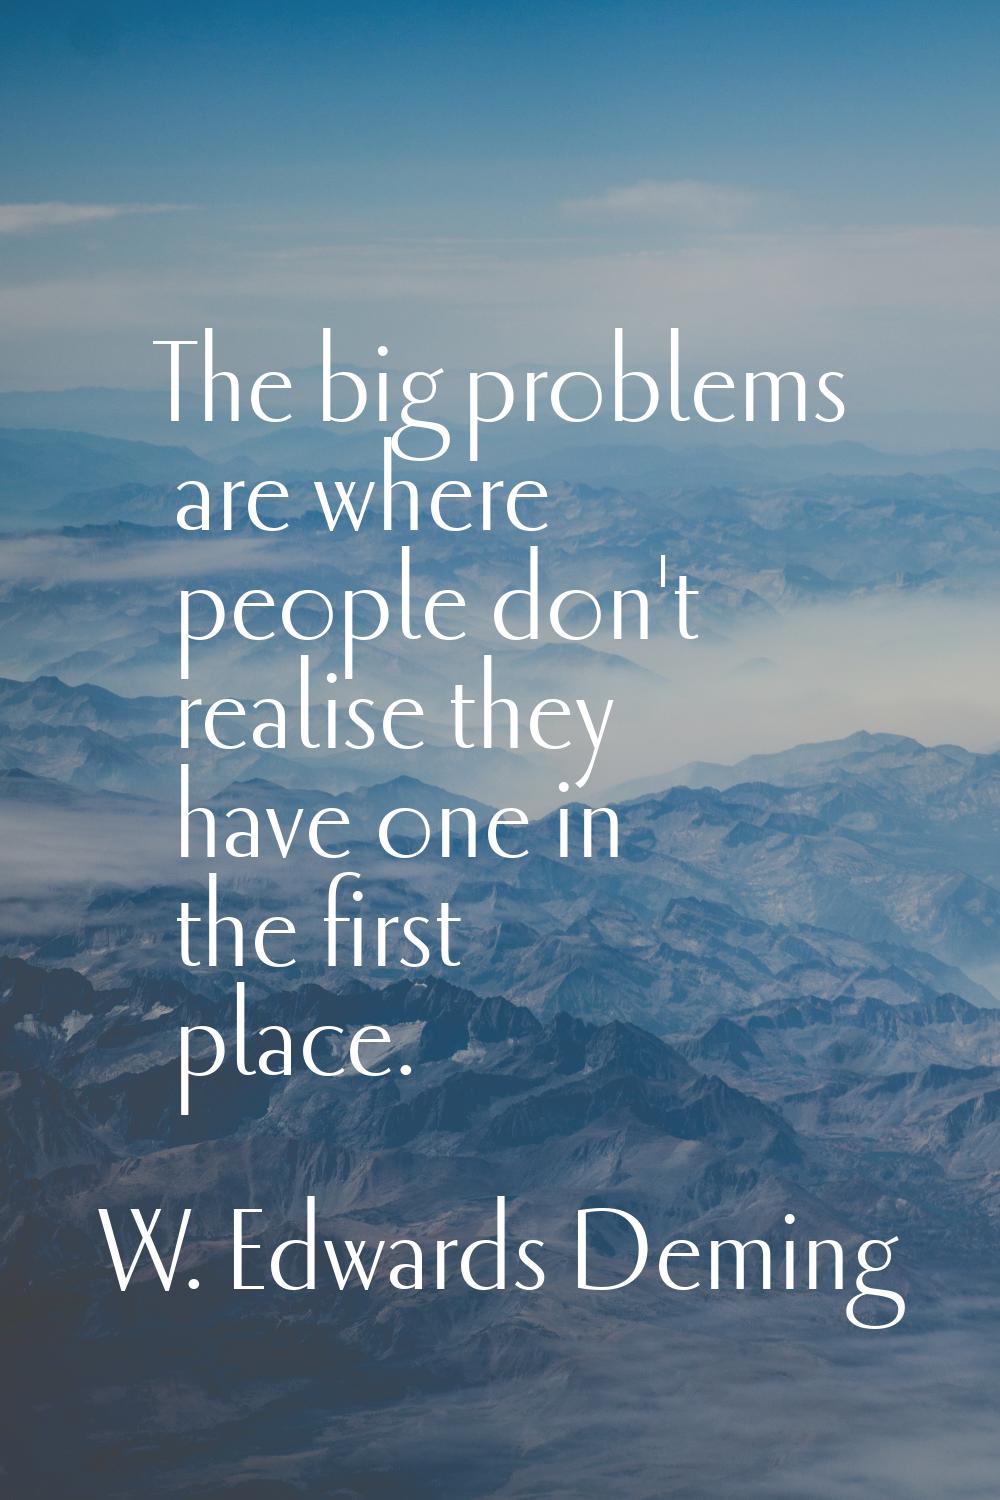 The big problems are where people don't realise they have one in the first place.